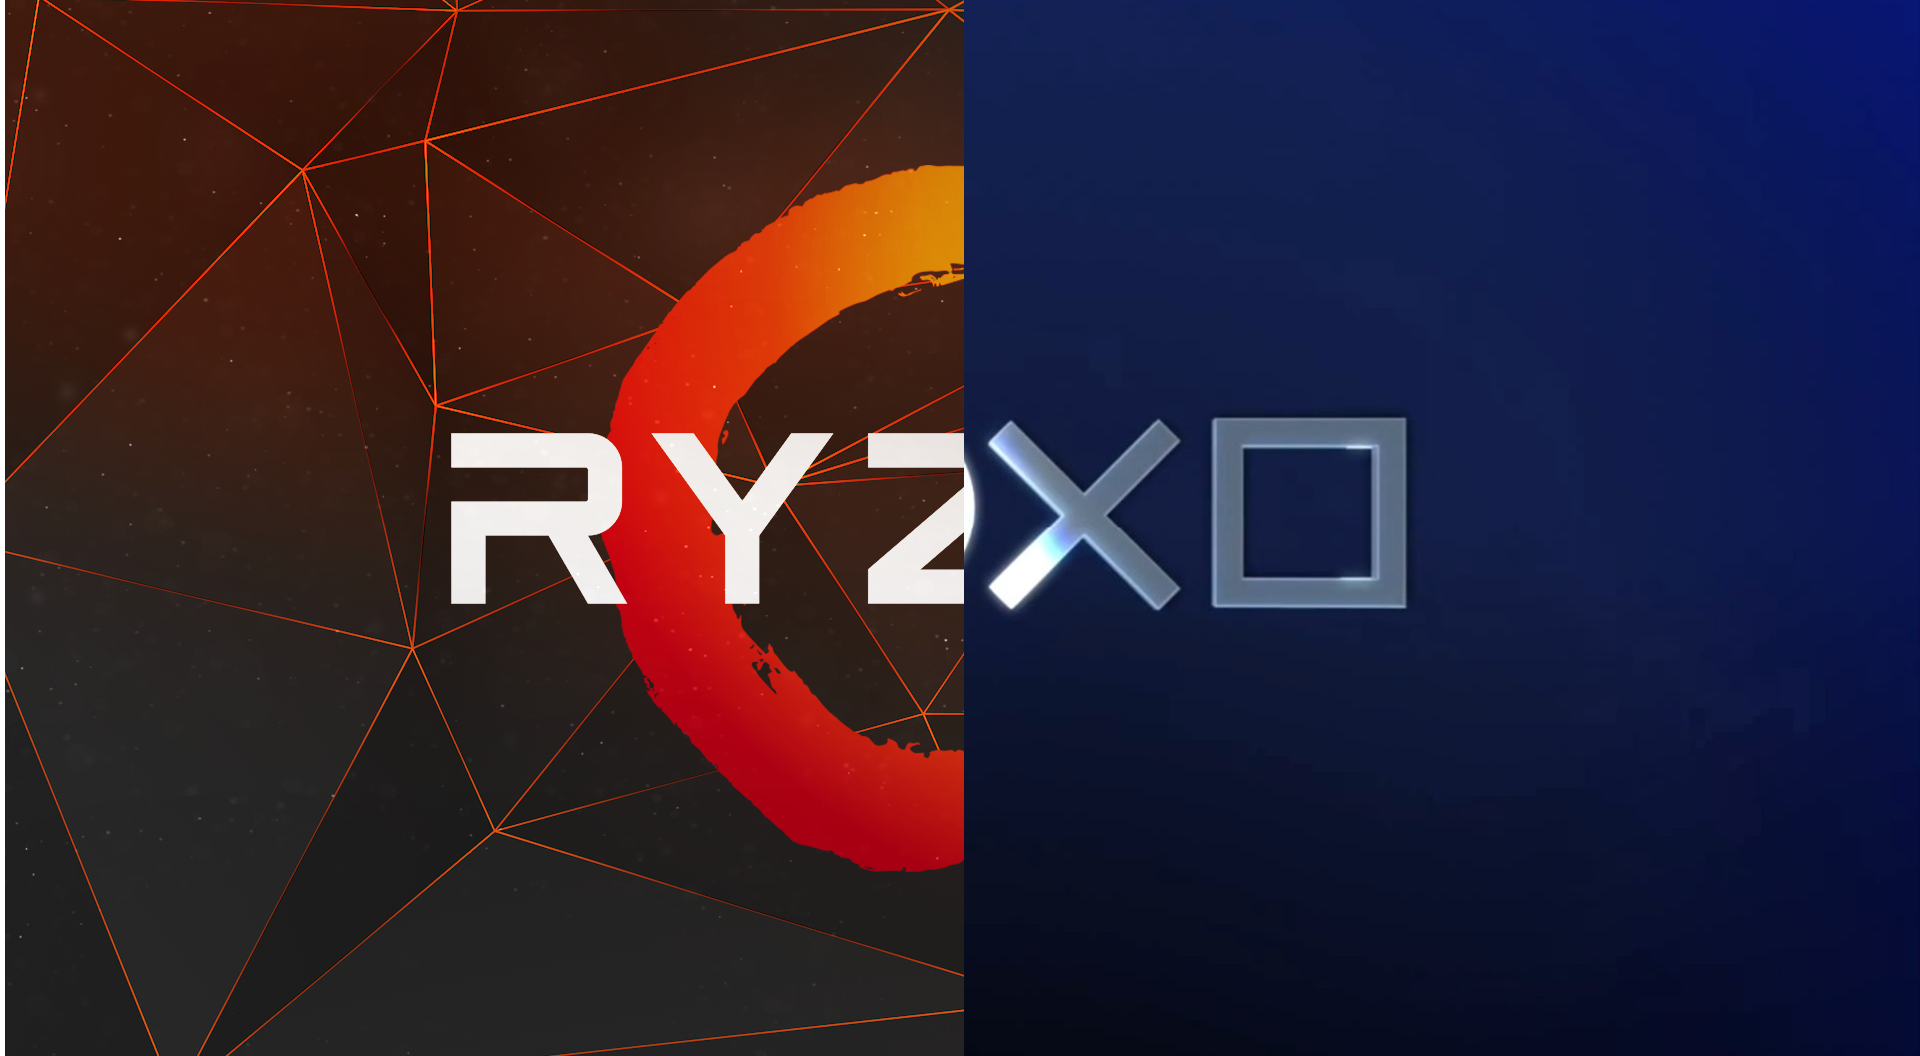 [Rumor] Sony is already testing AMD’s Ryzen features with PS5 in mind